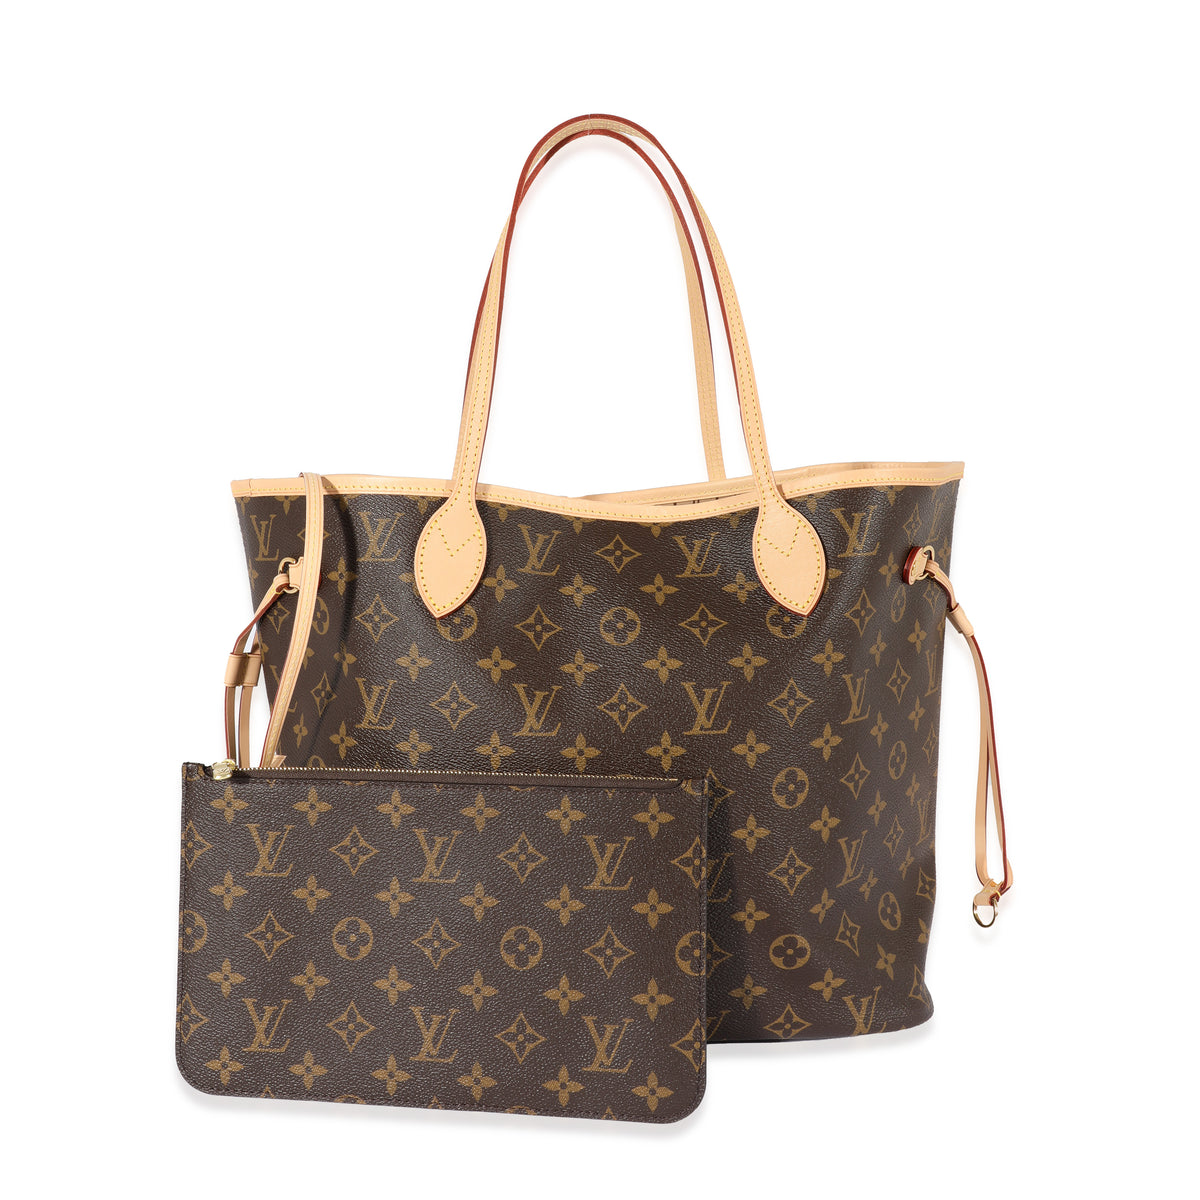 person louis vuitton neverfull dimensions